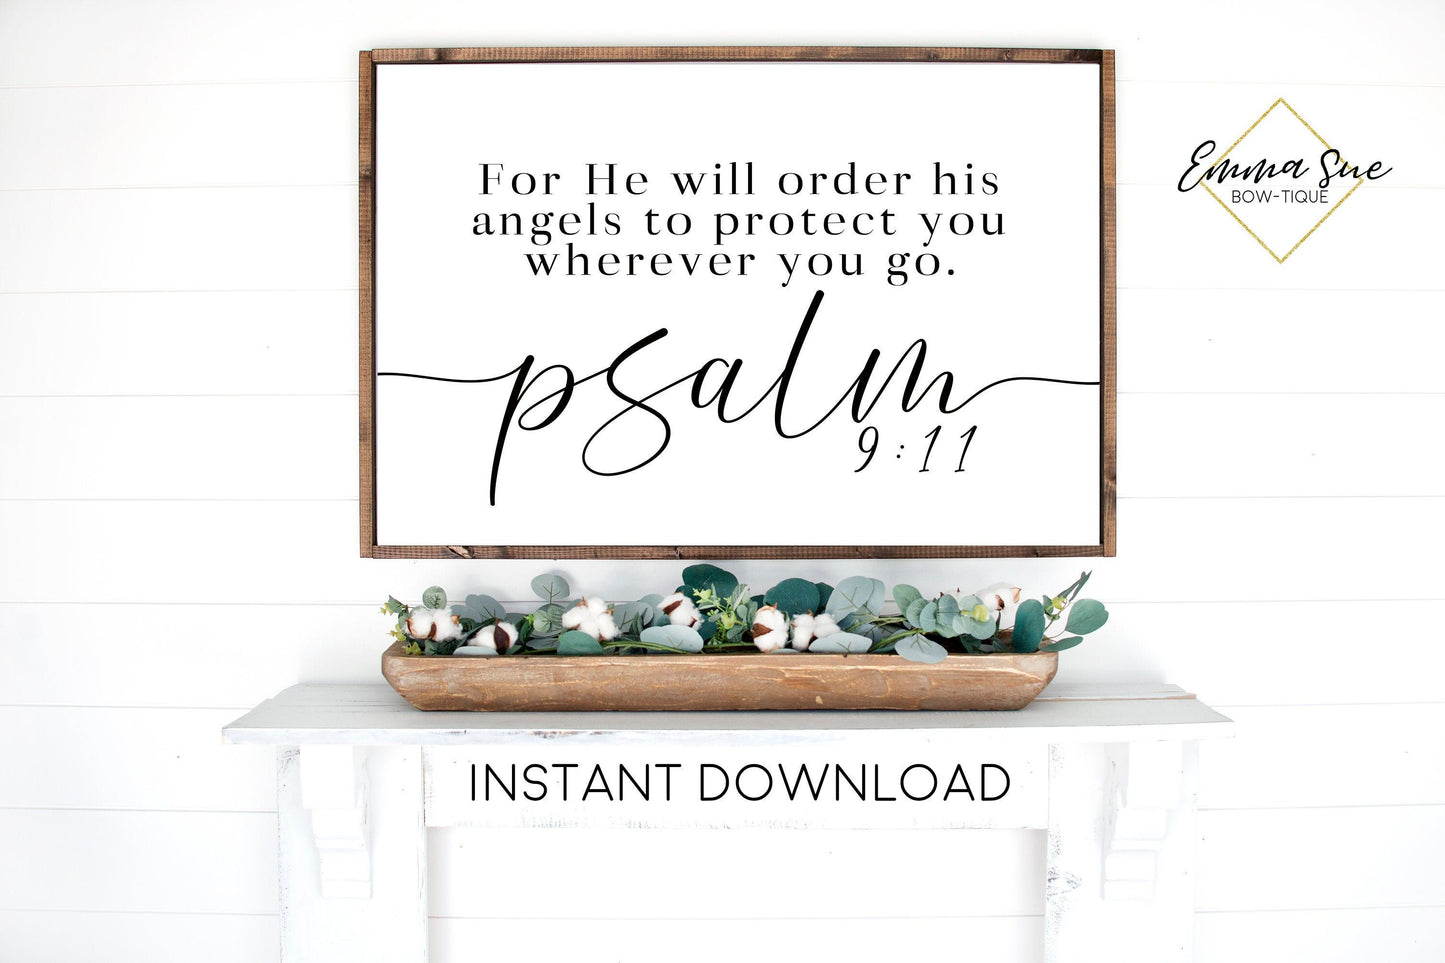 For He will order his angels to protect you wherever you go Psalm 9:11 Bible Verse Printable Sign Wall Art